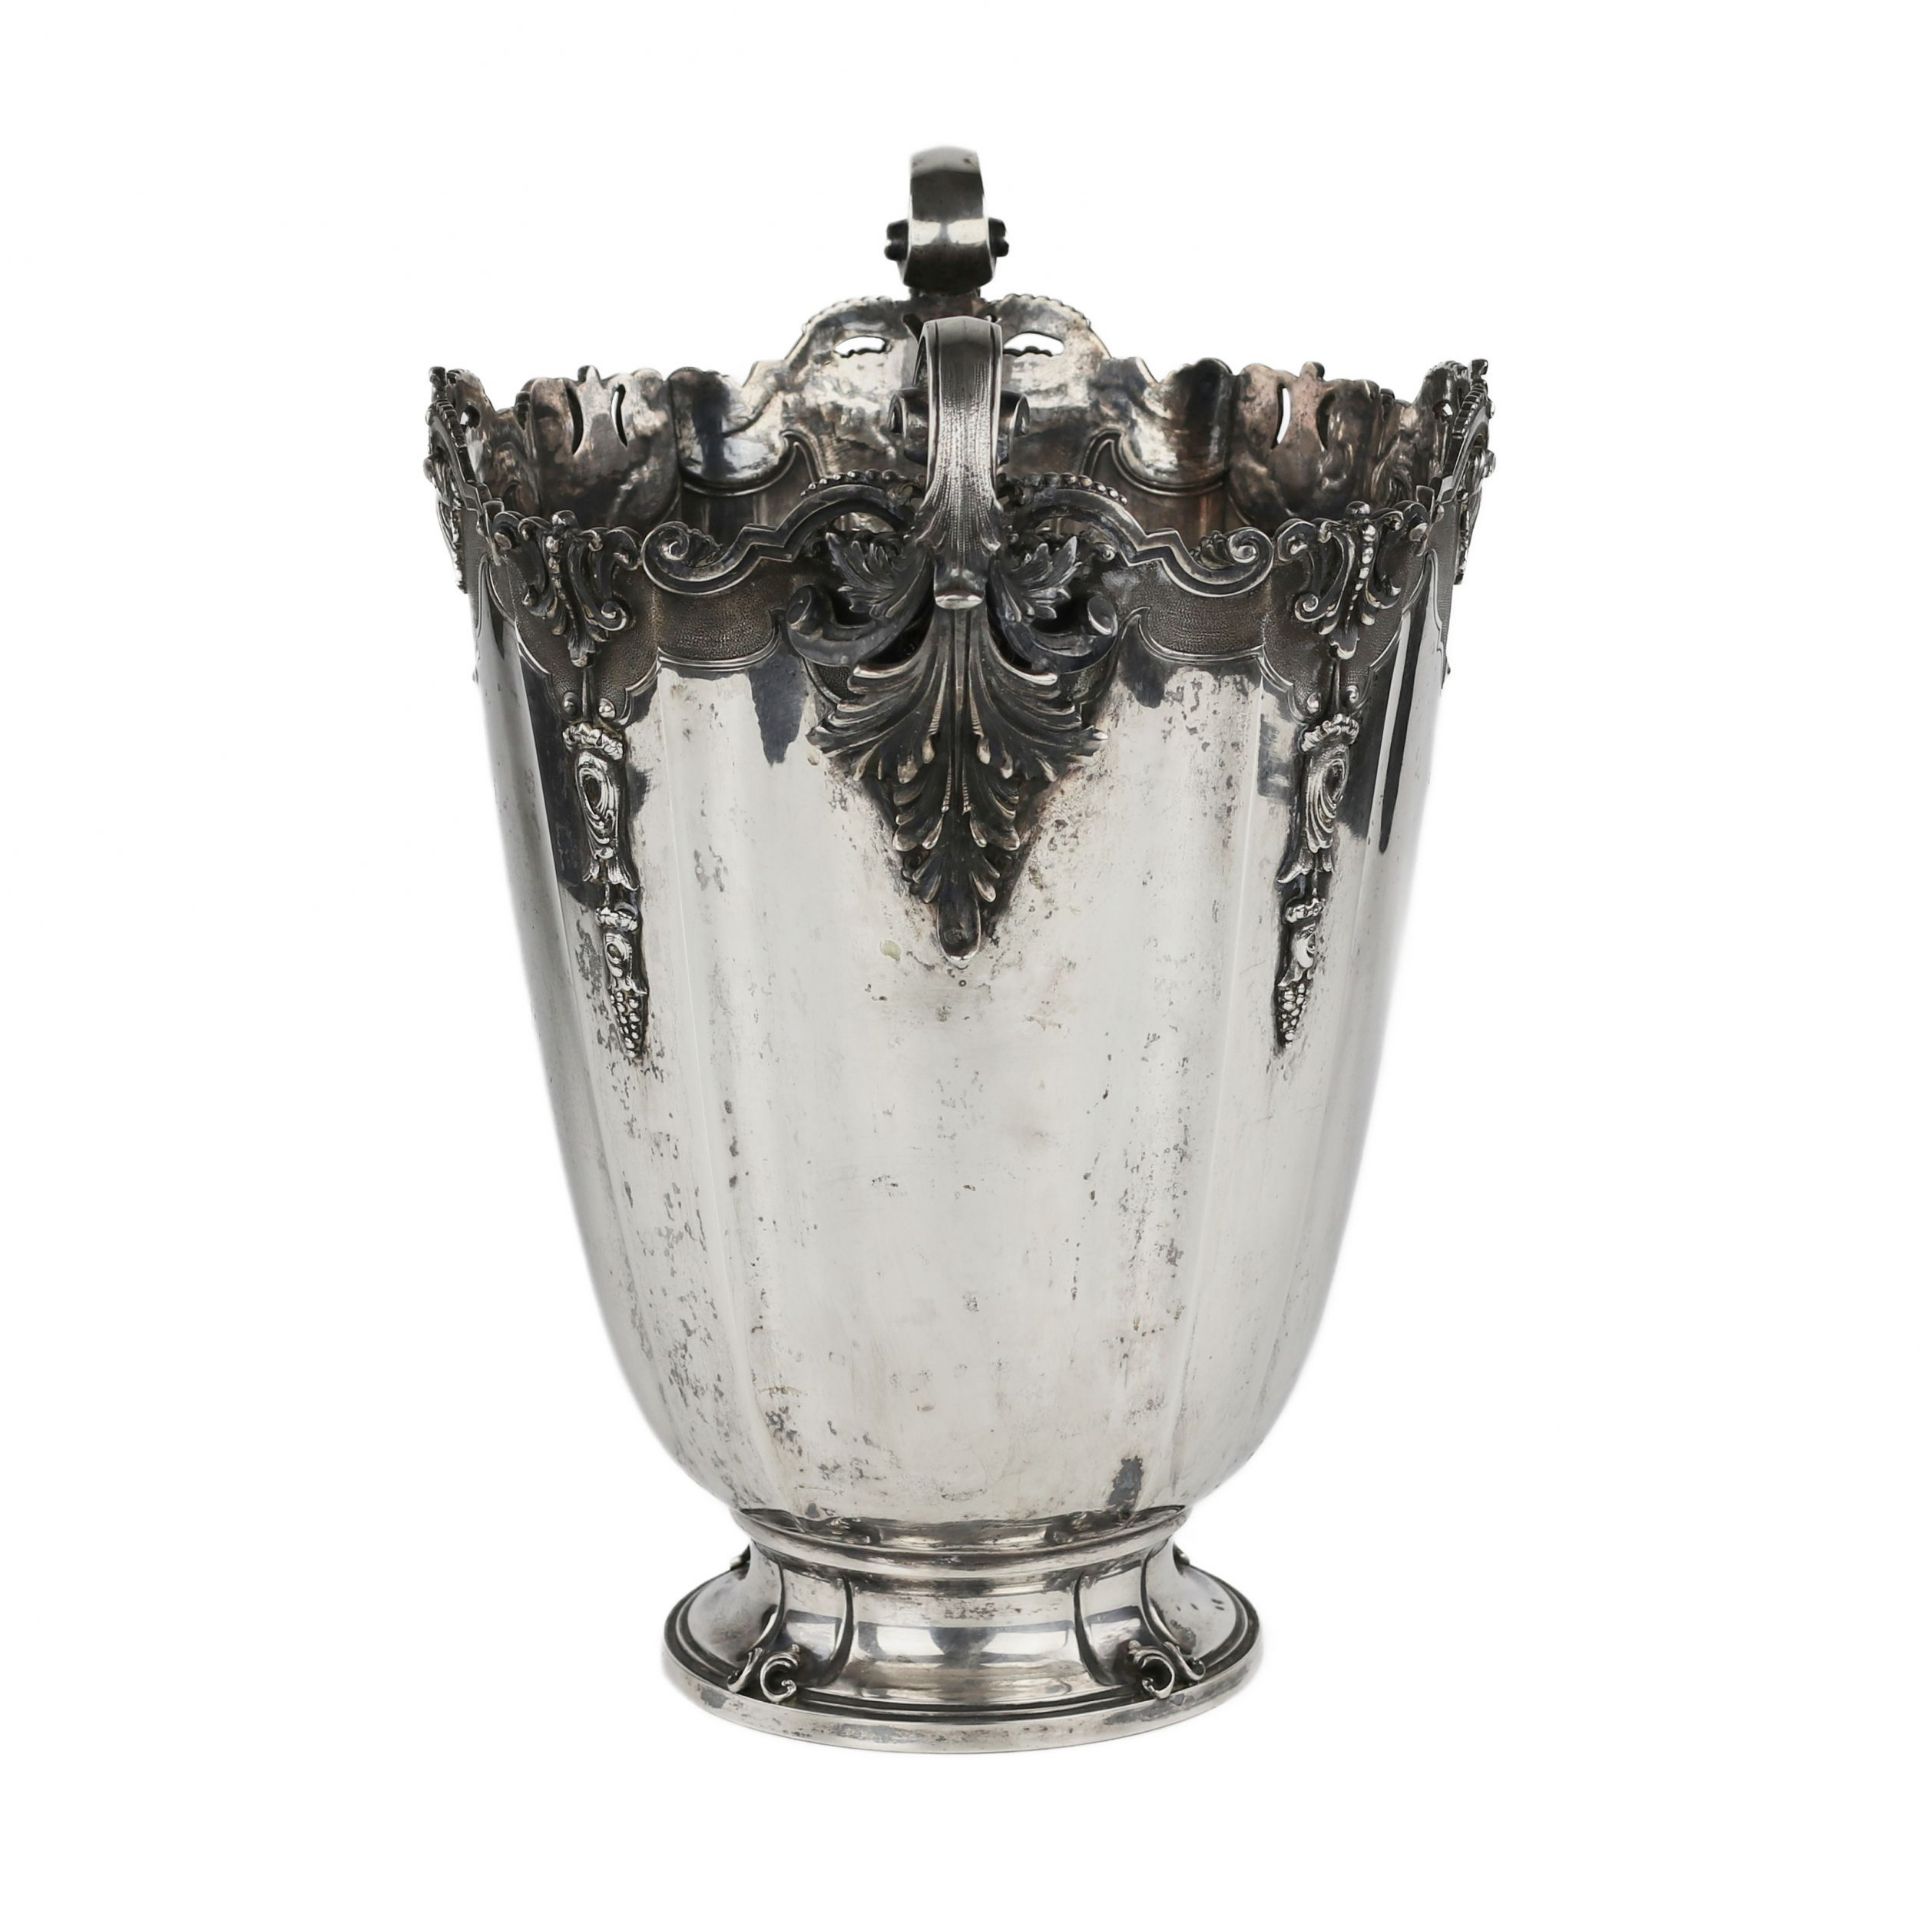 An ornate Italian silver cooler in the shape of a vase. 1934-1944 - Image 3 of 7